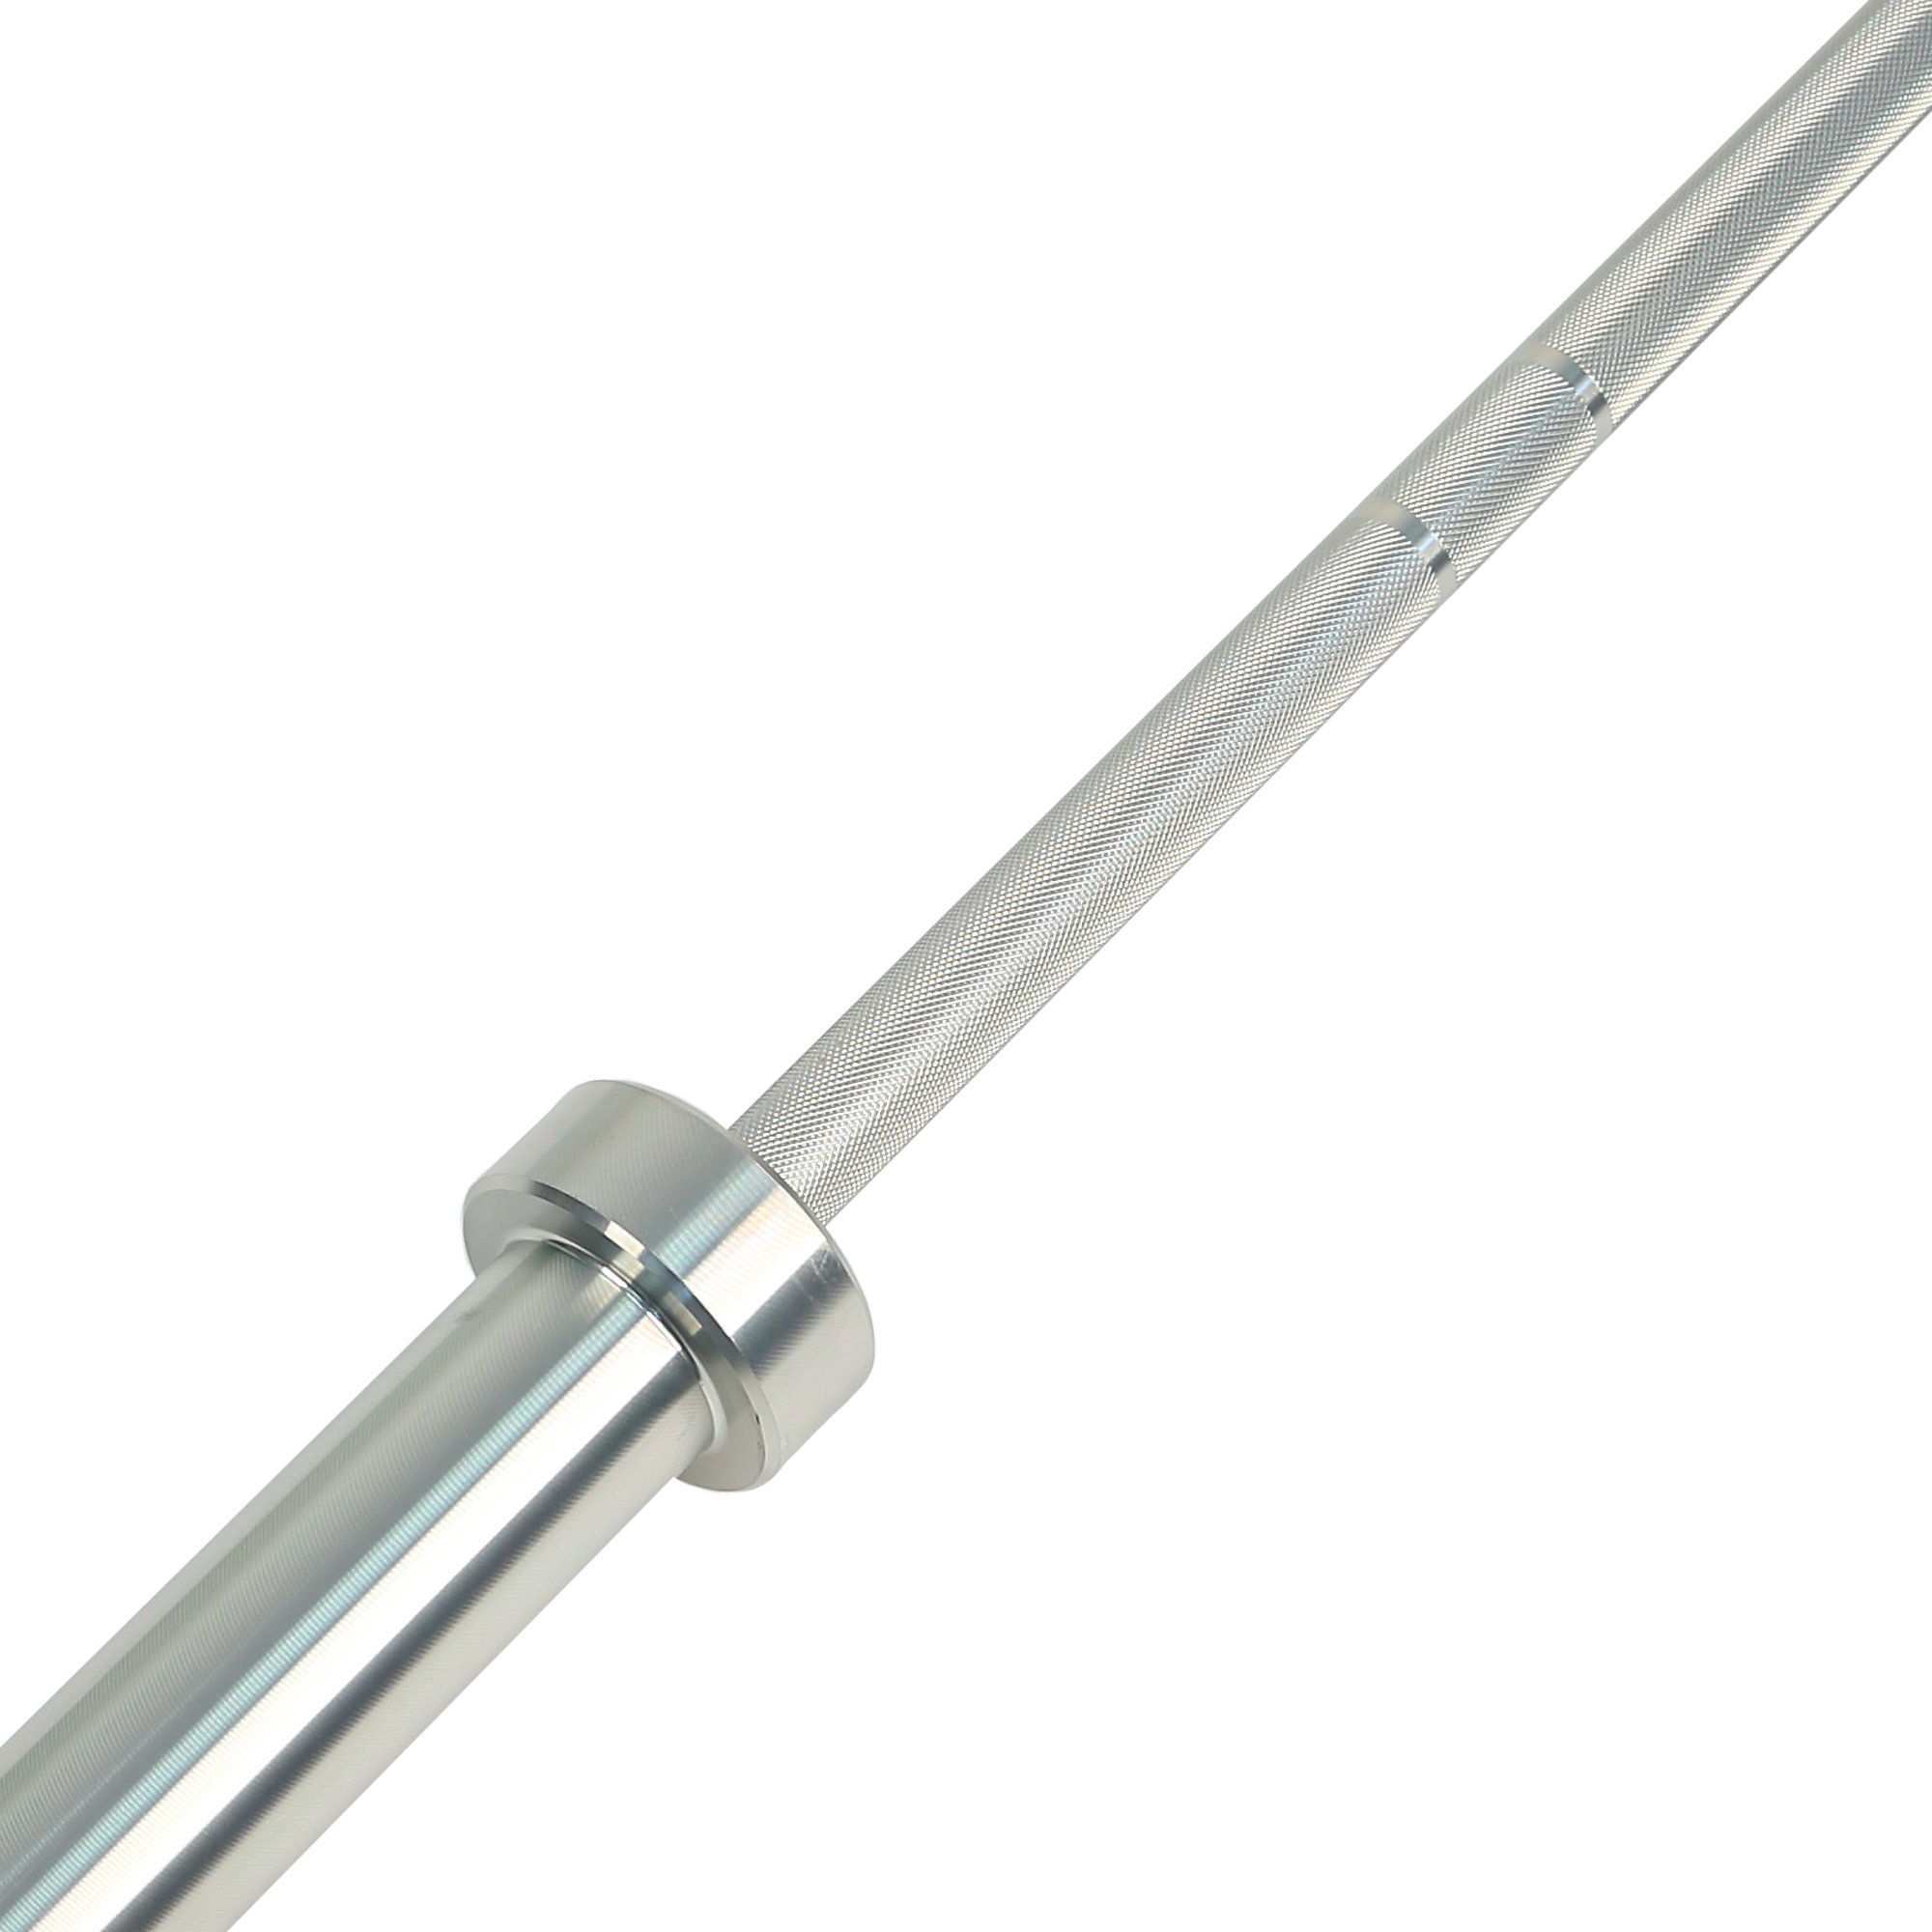 15kg Olympic Weightlifting Barbell, 25mm Shaft, 6 1/2'